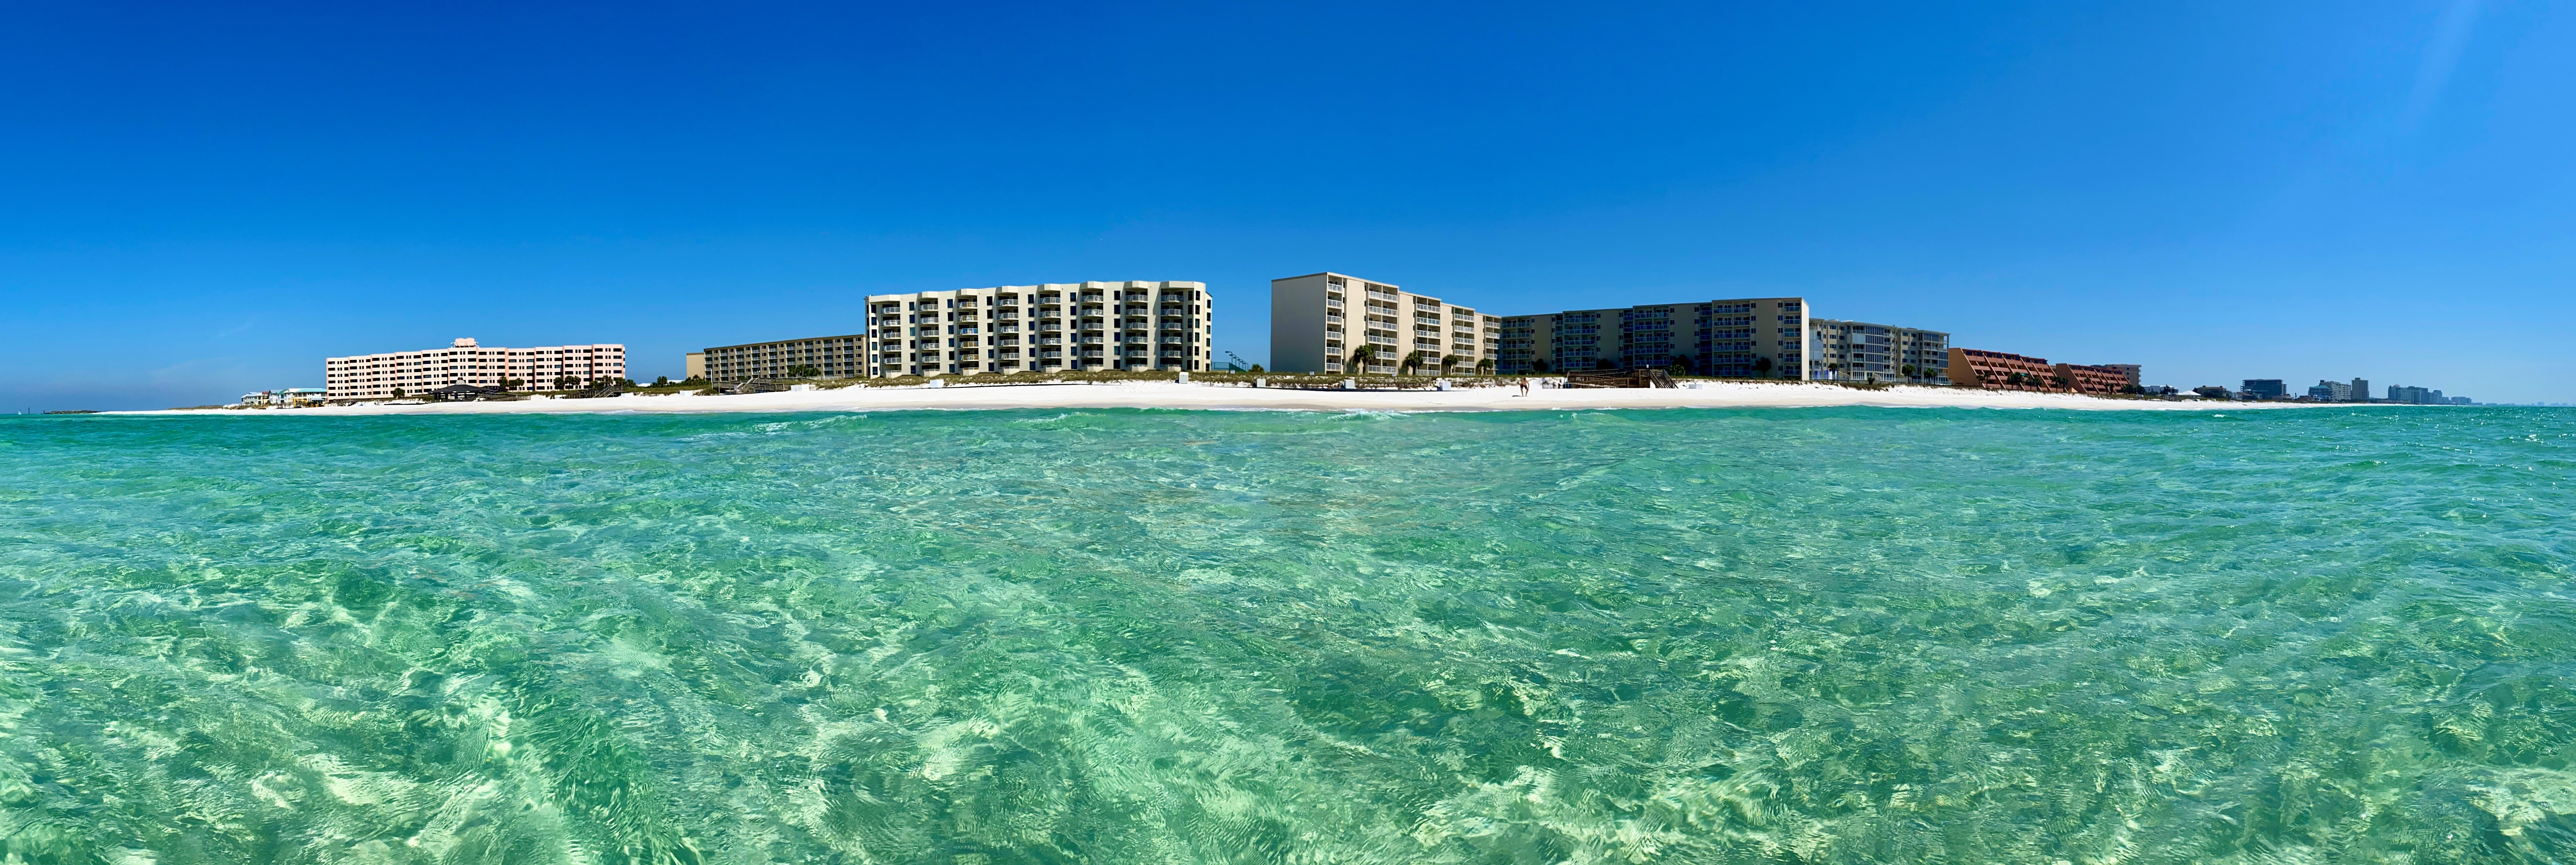 Holiday Surf and Racquet Club 403 Condo rental in Holiday Surf & Racquet Club in Destin Florida - #32